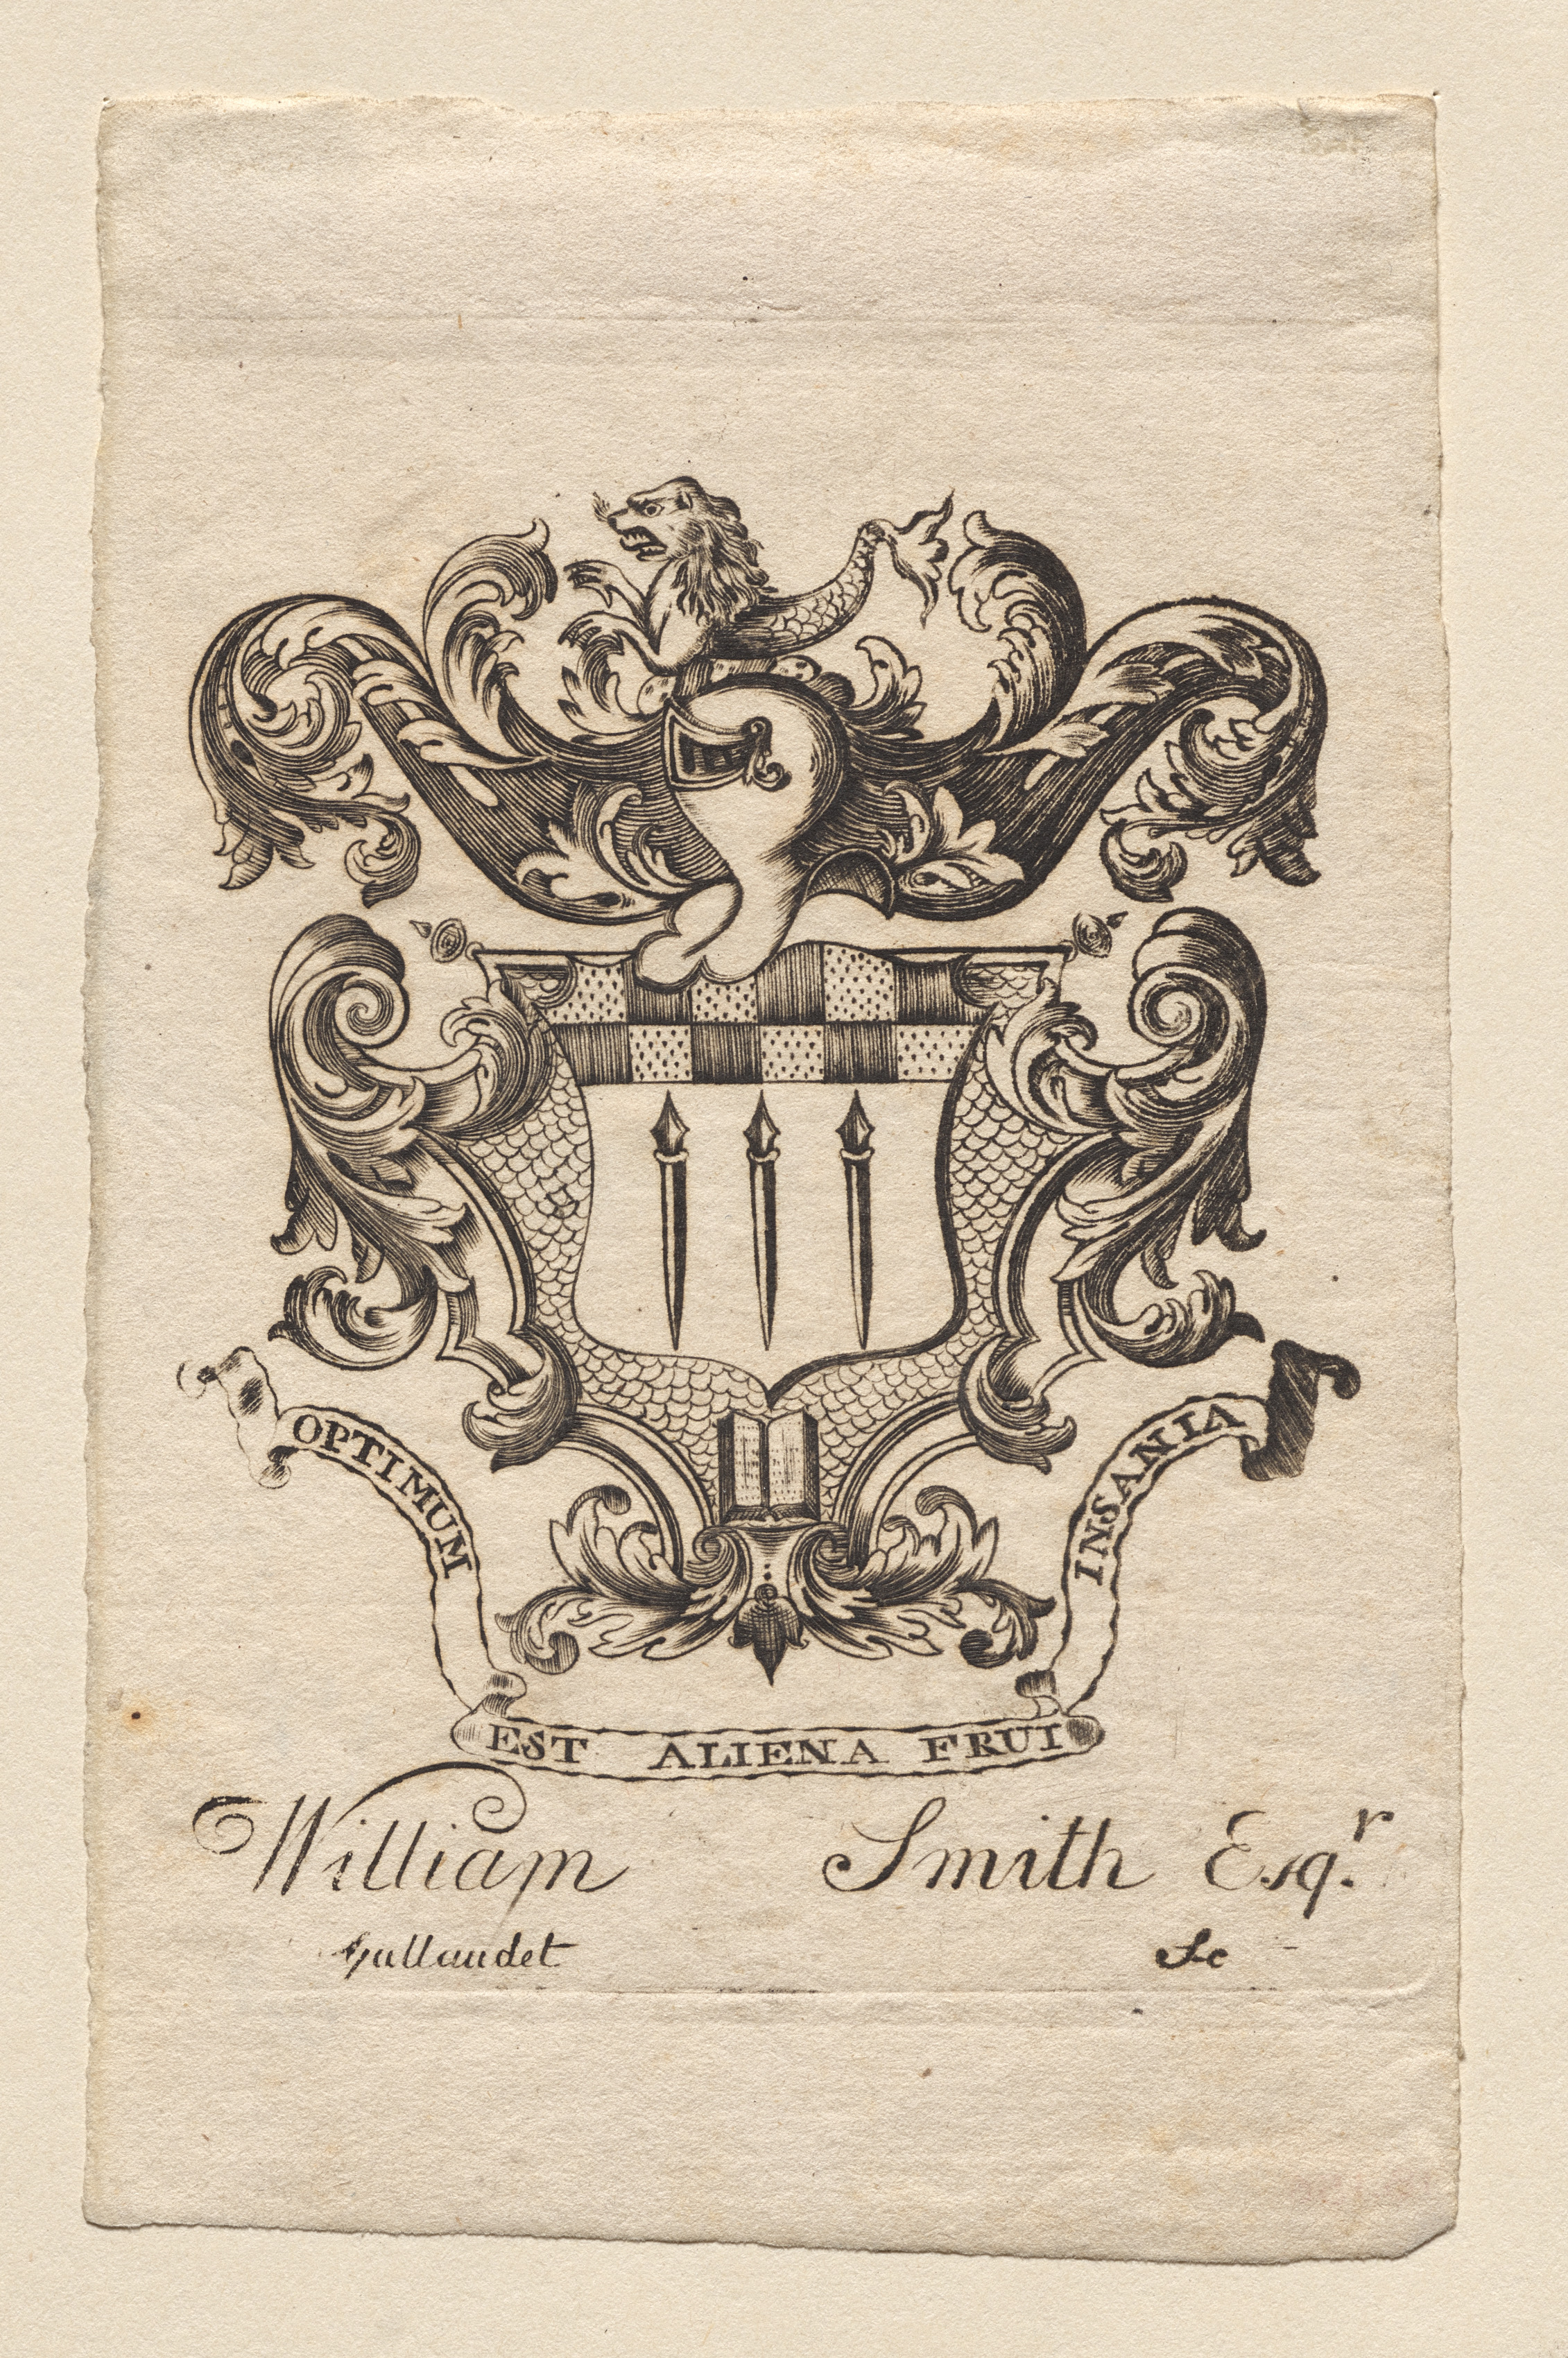 Bookplate:  Coat of Arms with William Smith, Esq. inscribed below